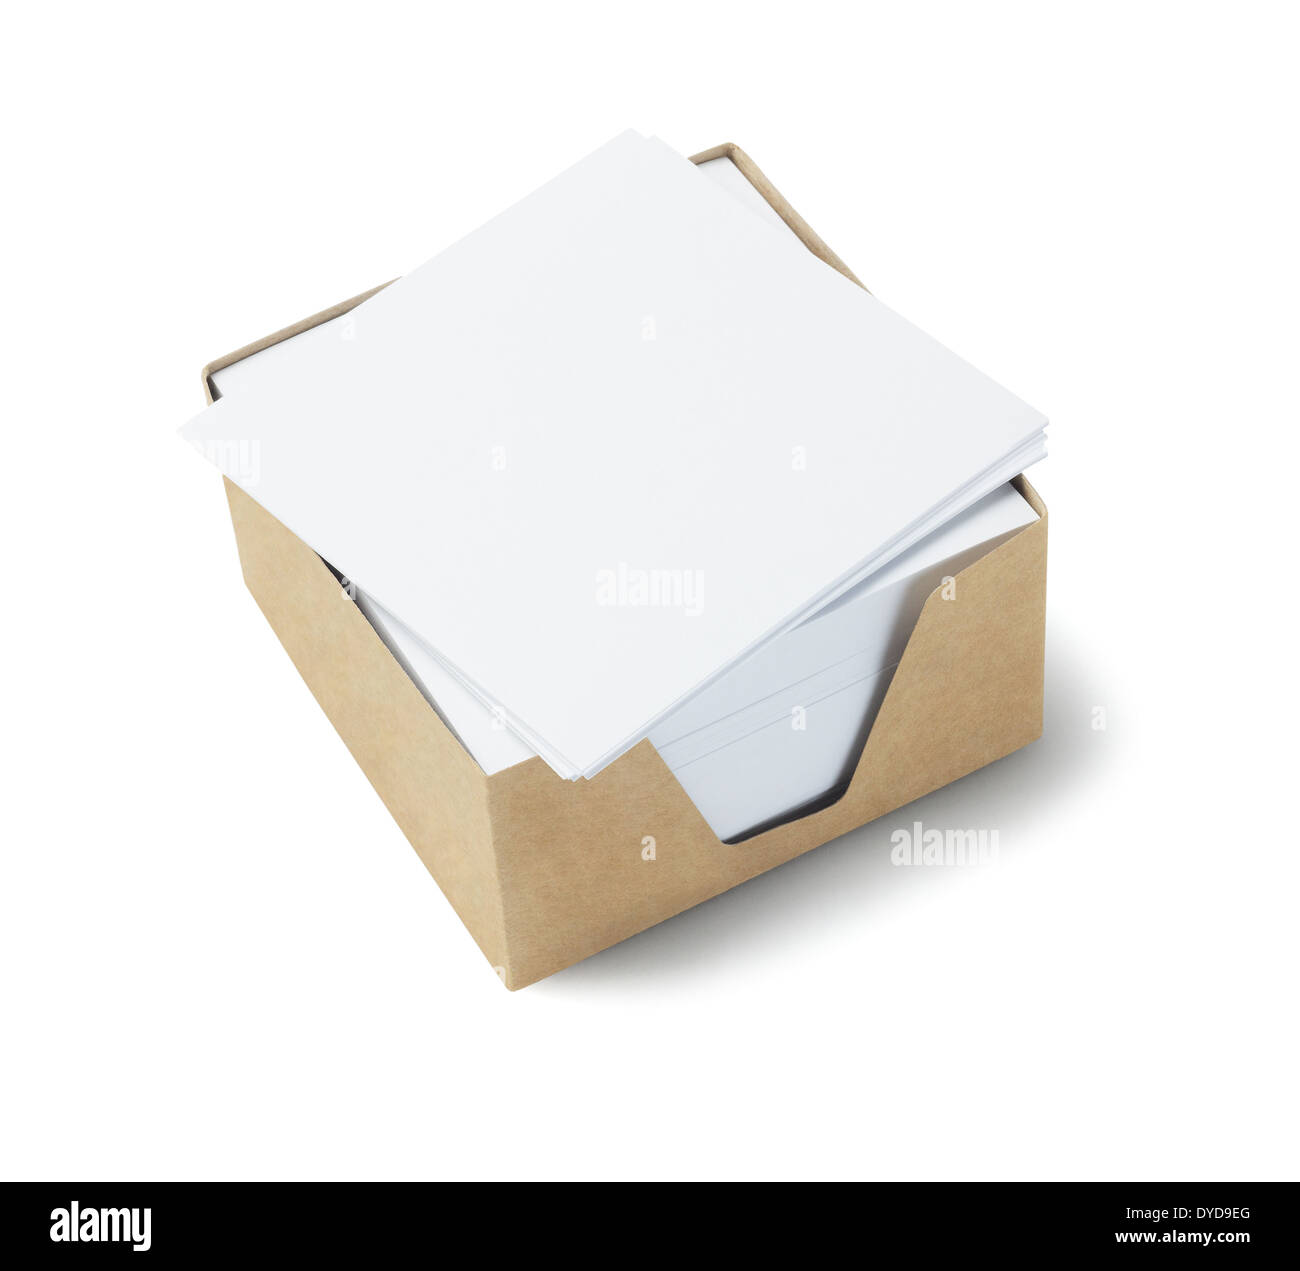 Box Of Memo Papers On White Background Stock Photo